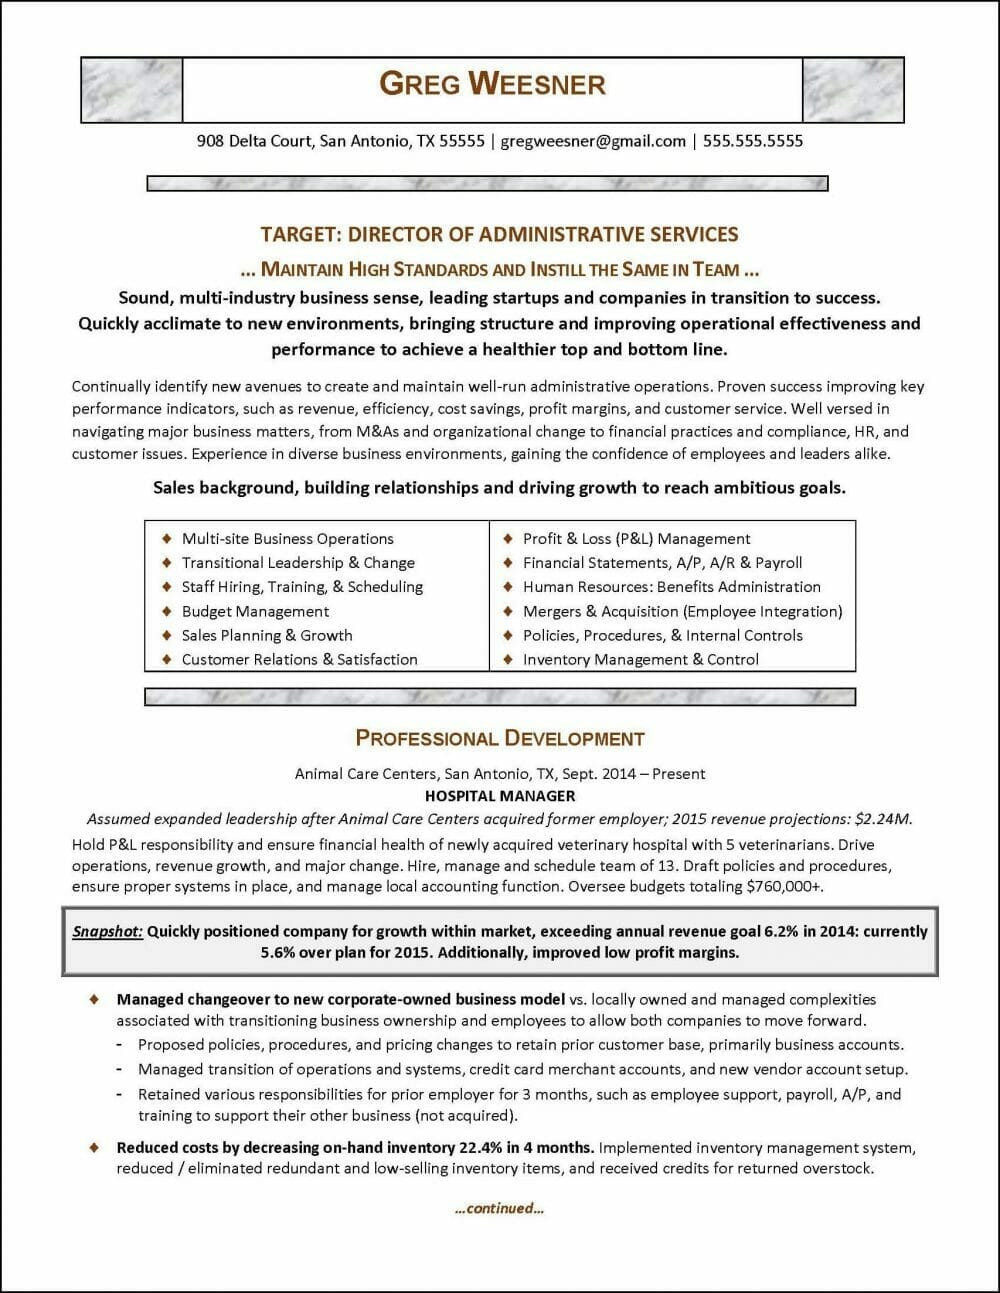 Sample Resume for Career Change to Administrative assistant Career Change Resume for A New Industry – Distinctive Career Services